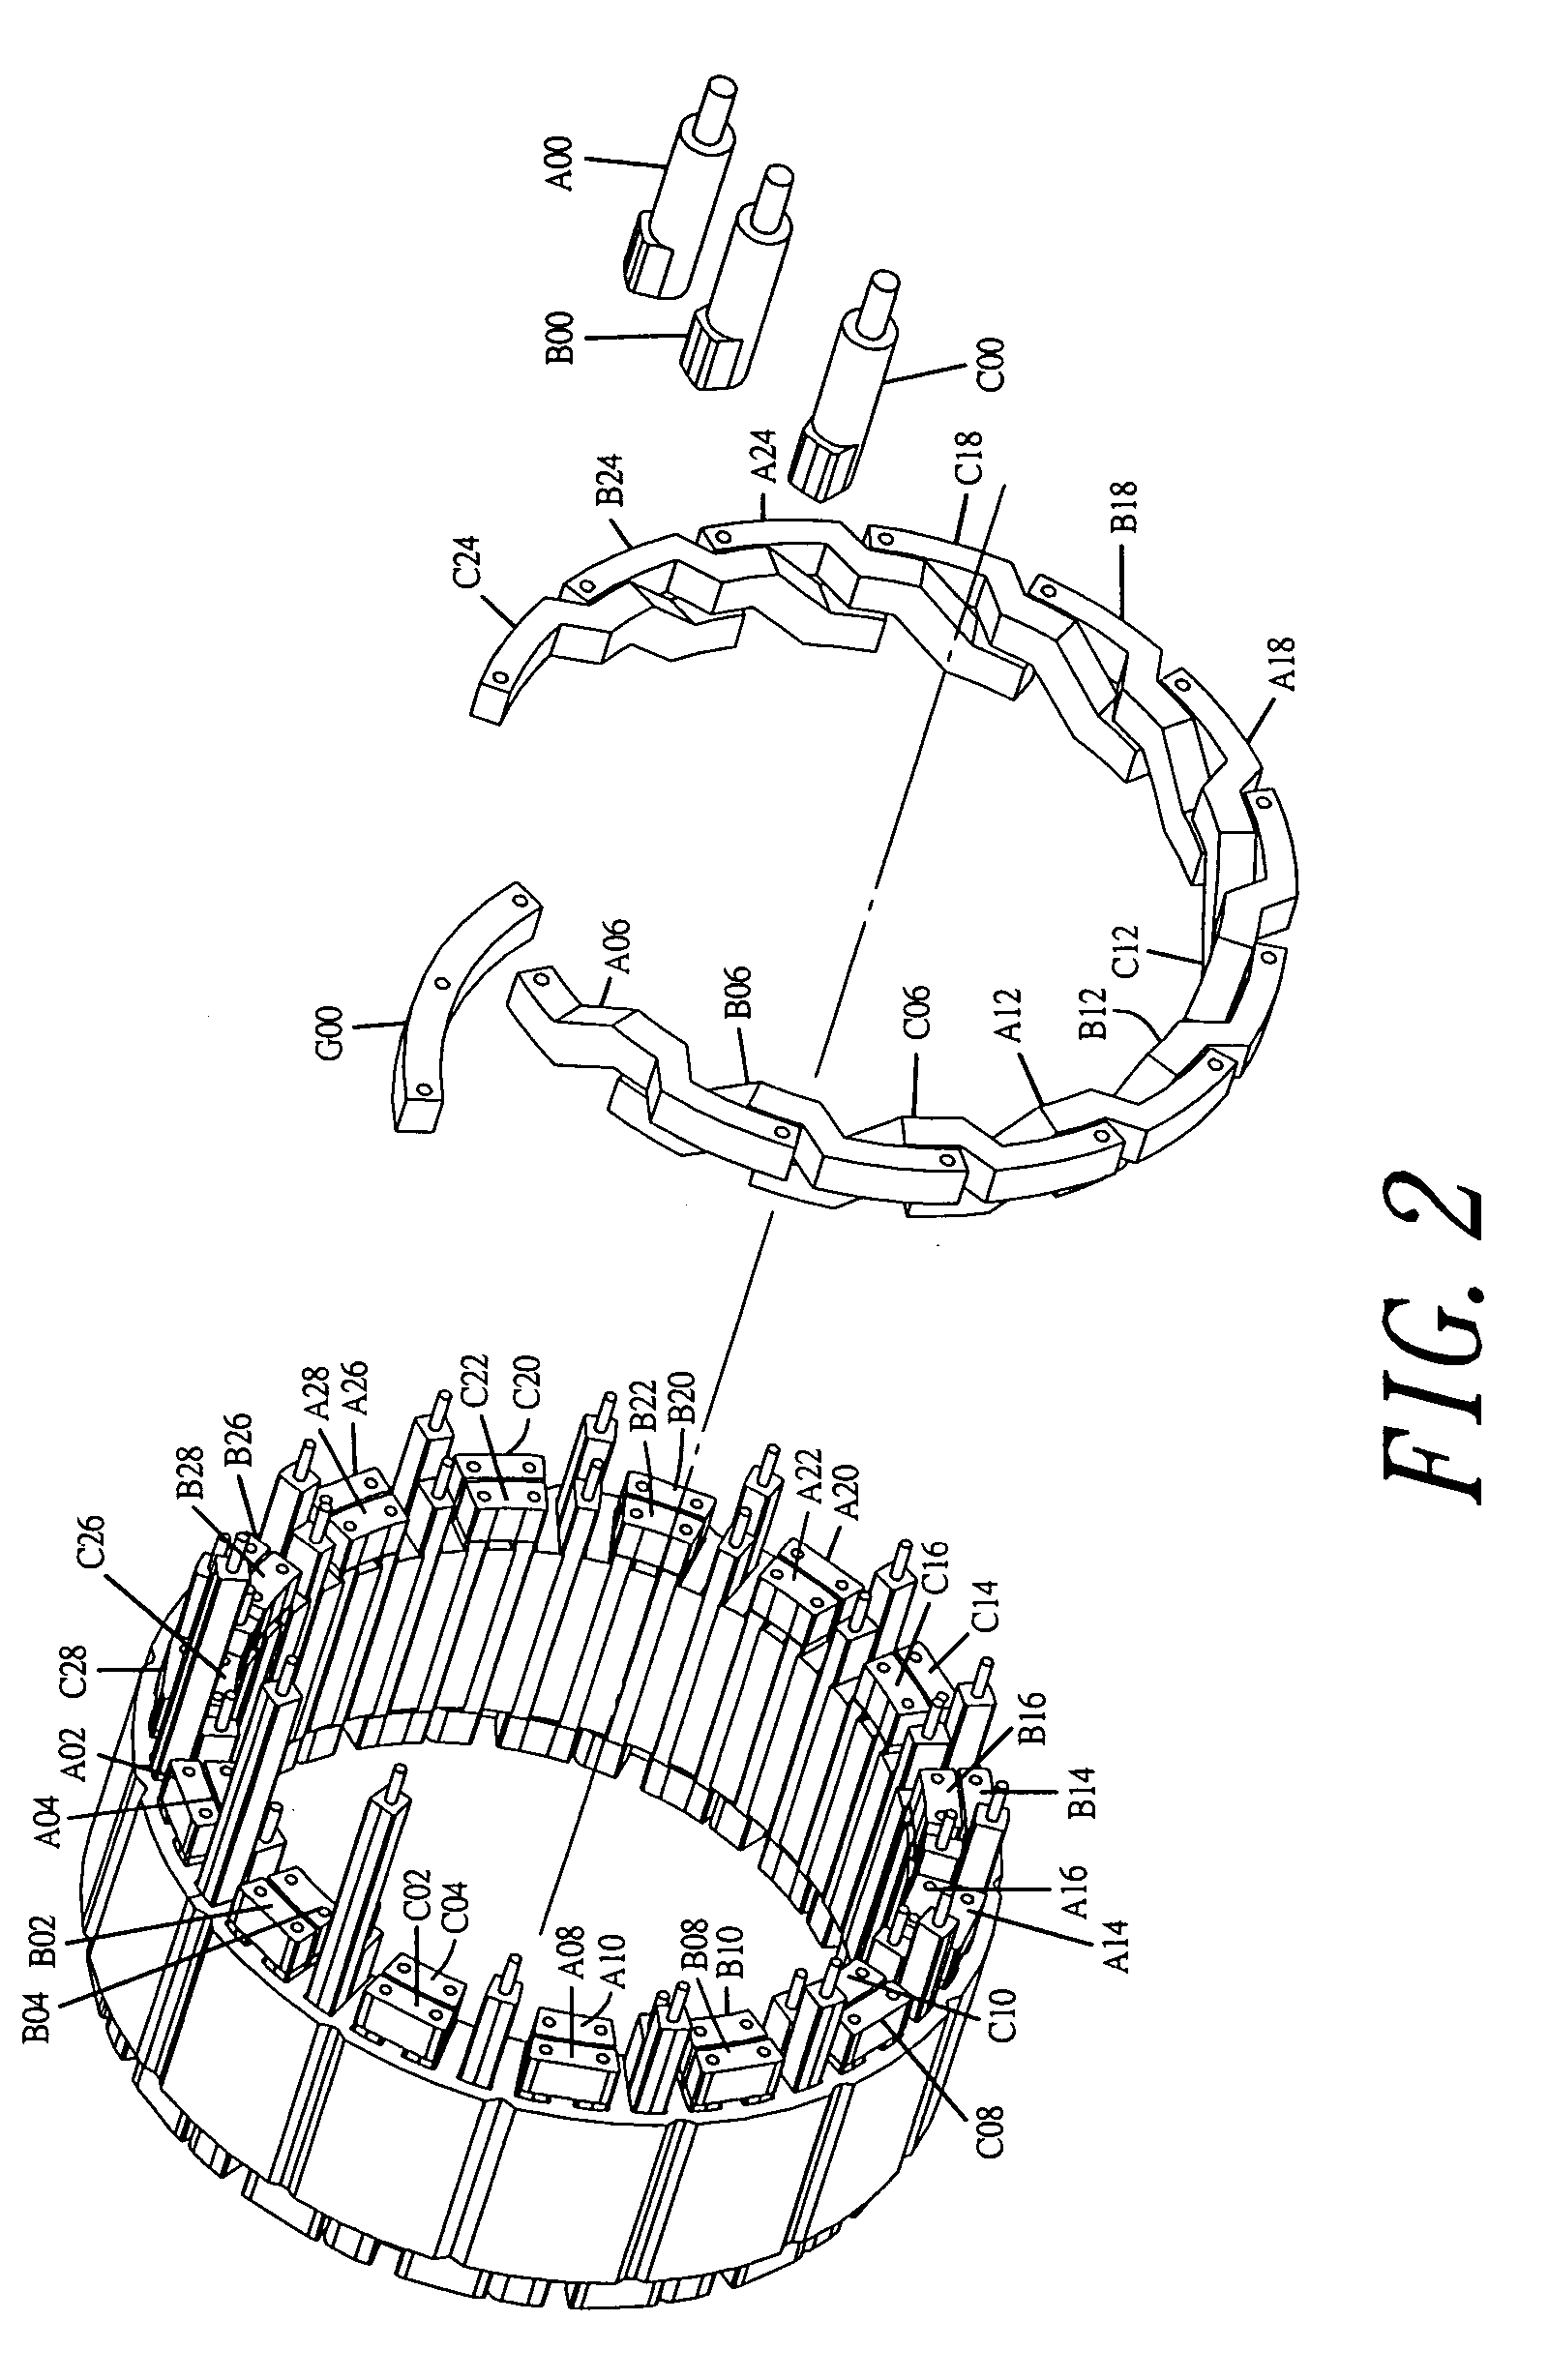 Stator winding structure of a motor or a generator